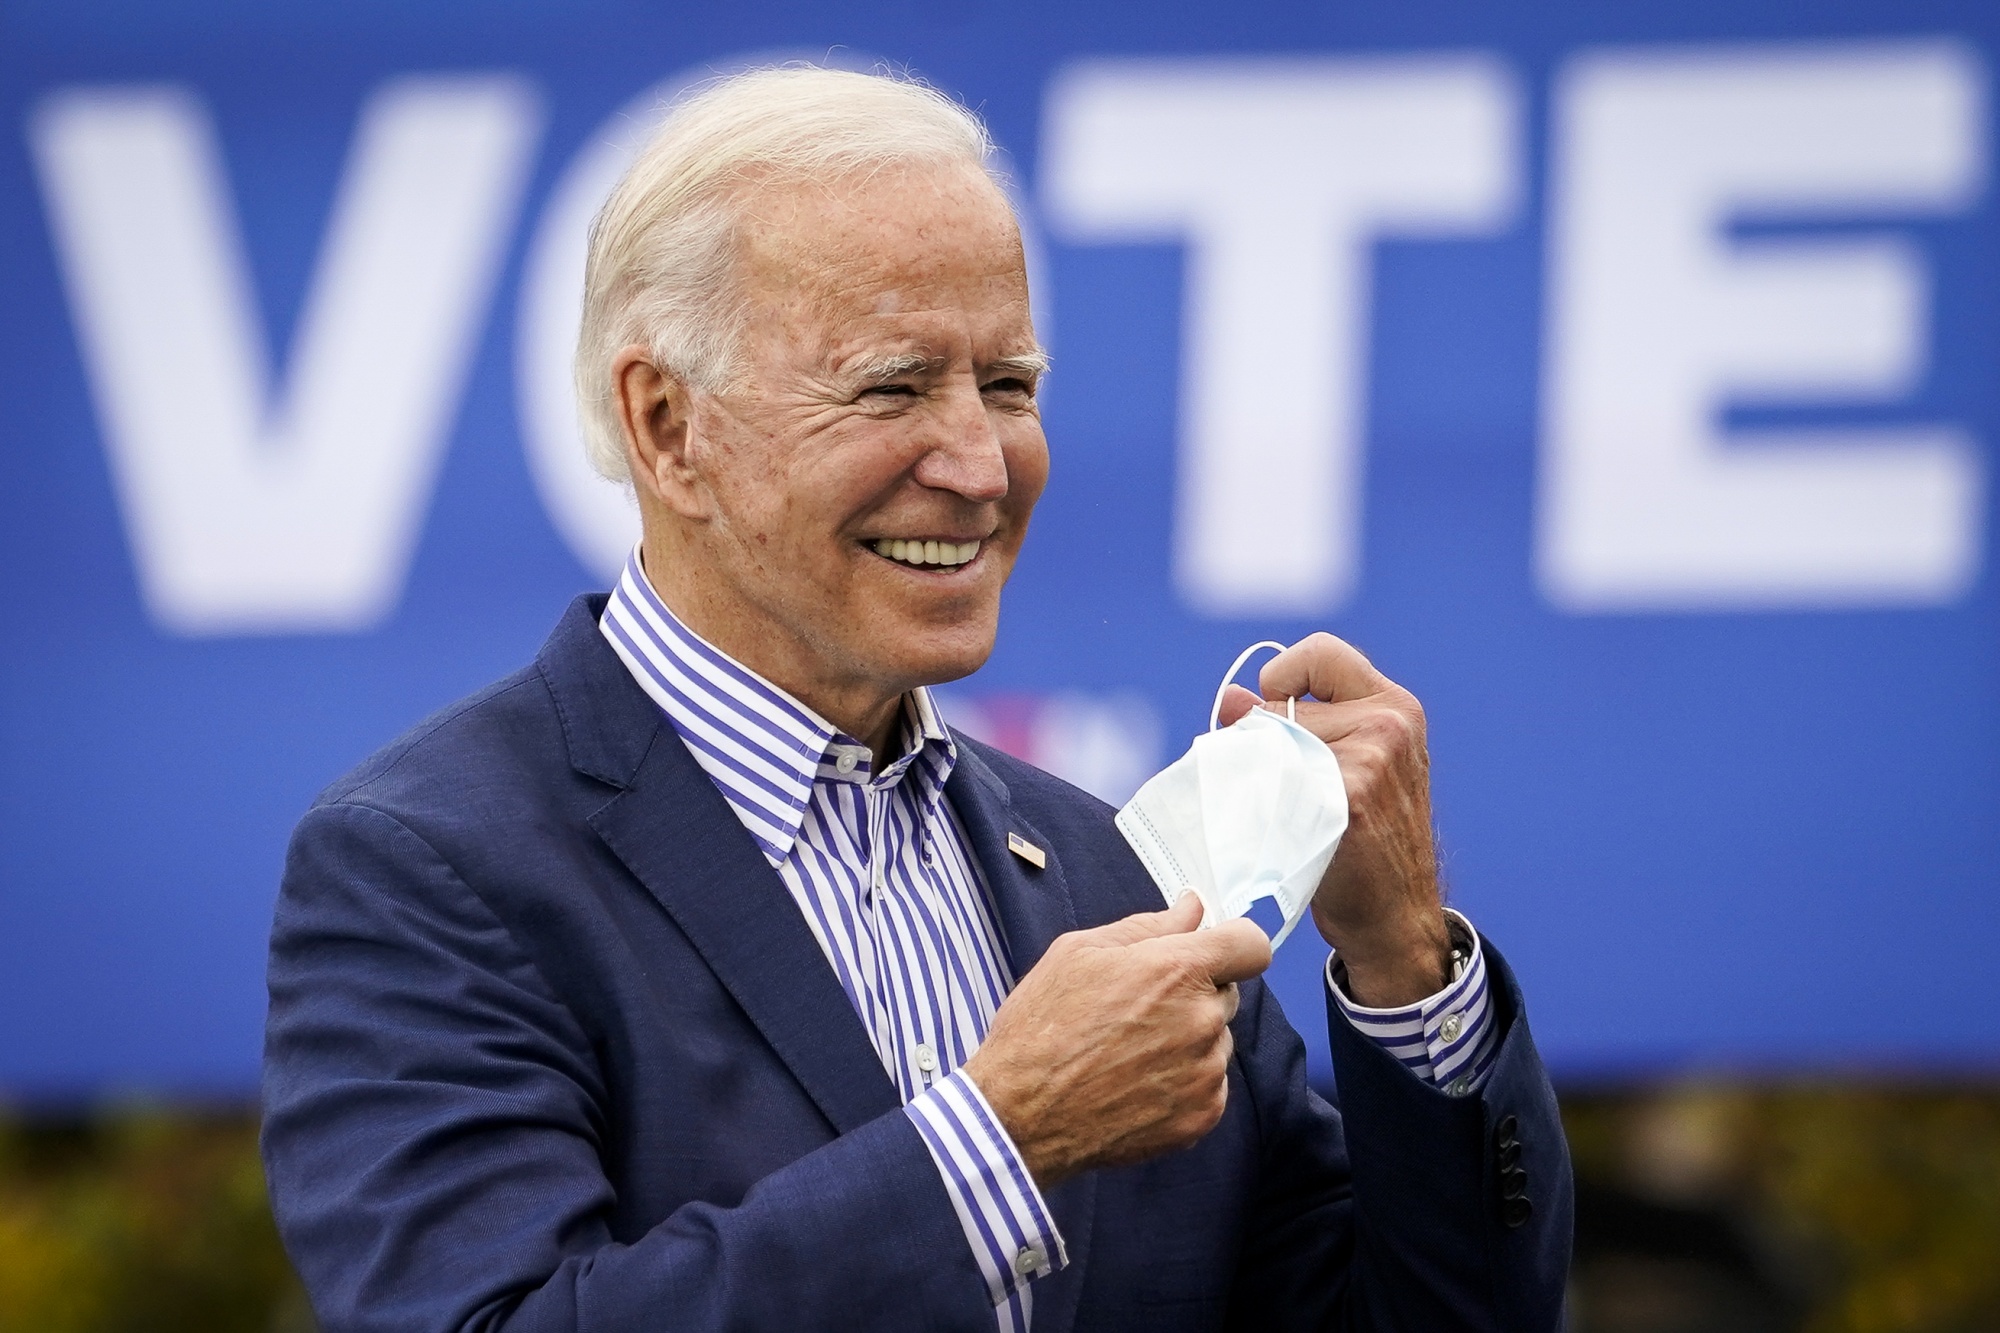 If Biden wins, the FCC could begin the new presidential term with a Democratic majority, allowing it to move quickly.